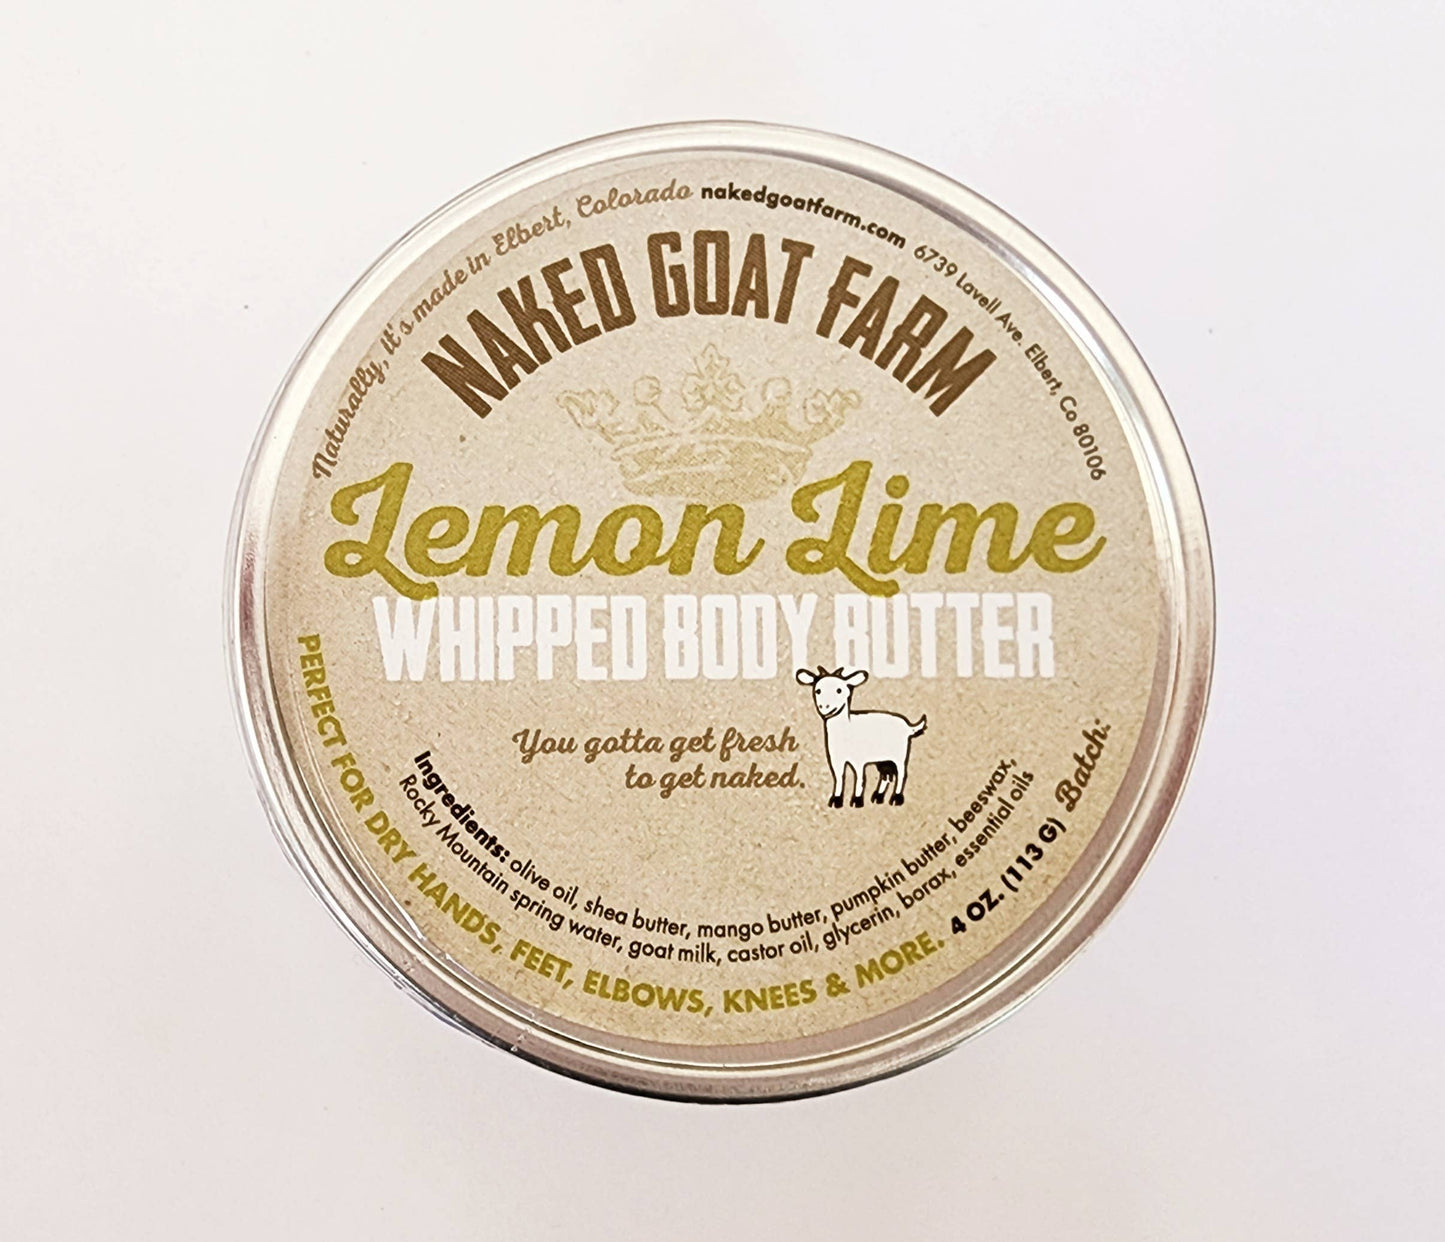 Whipped Body Butter 4 oz